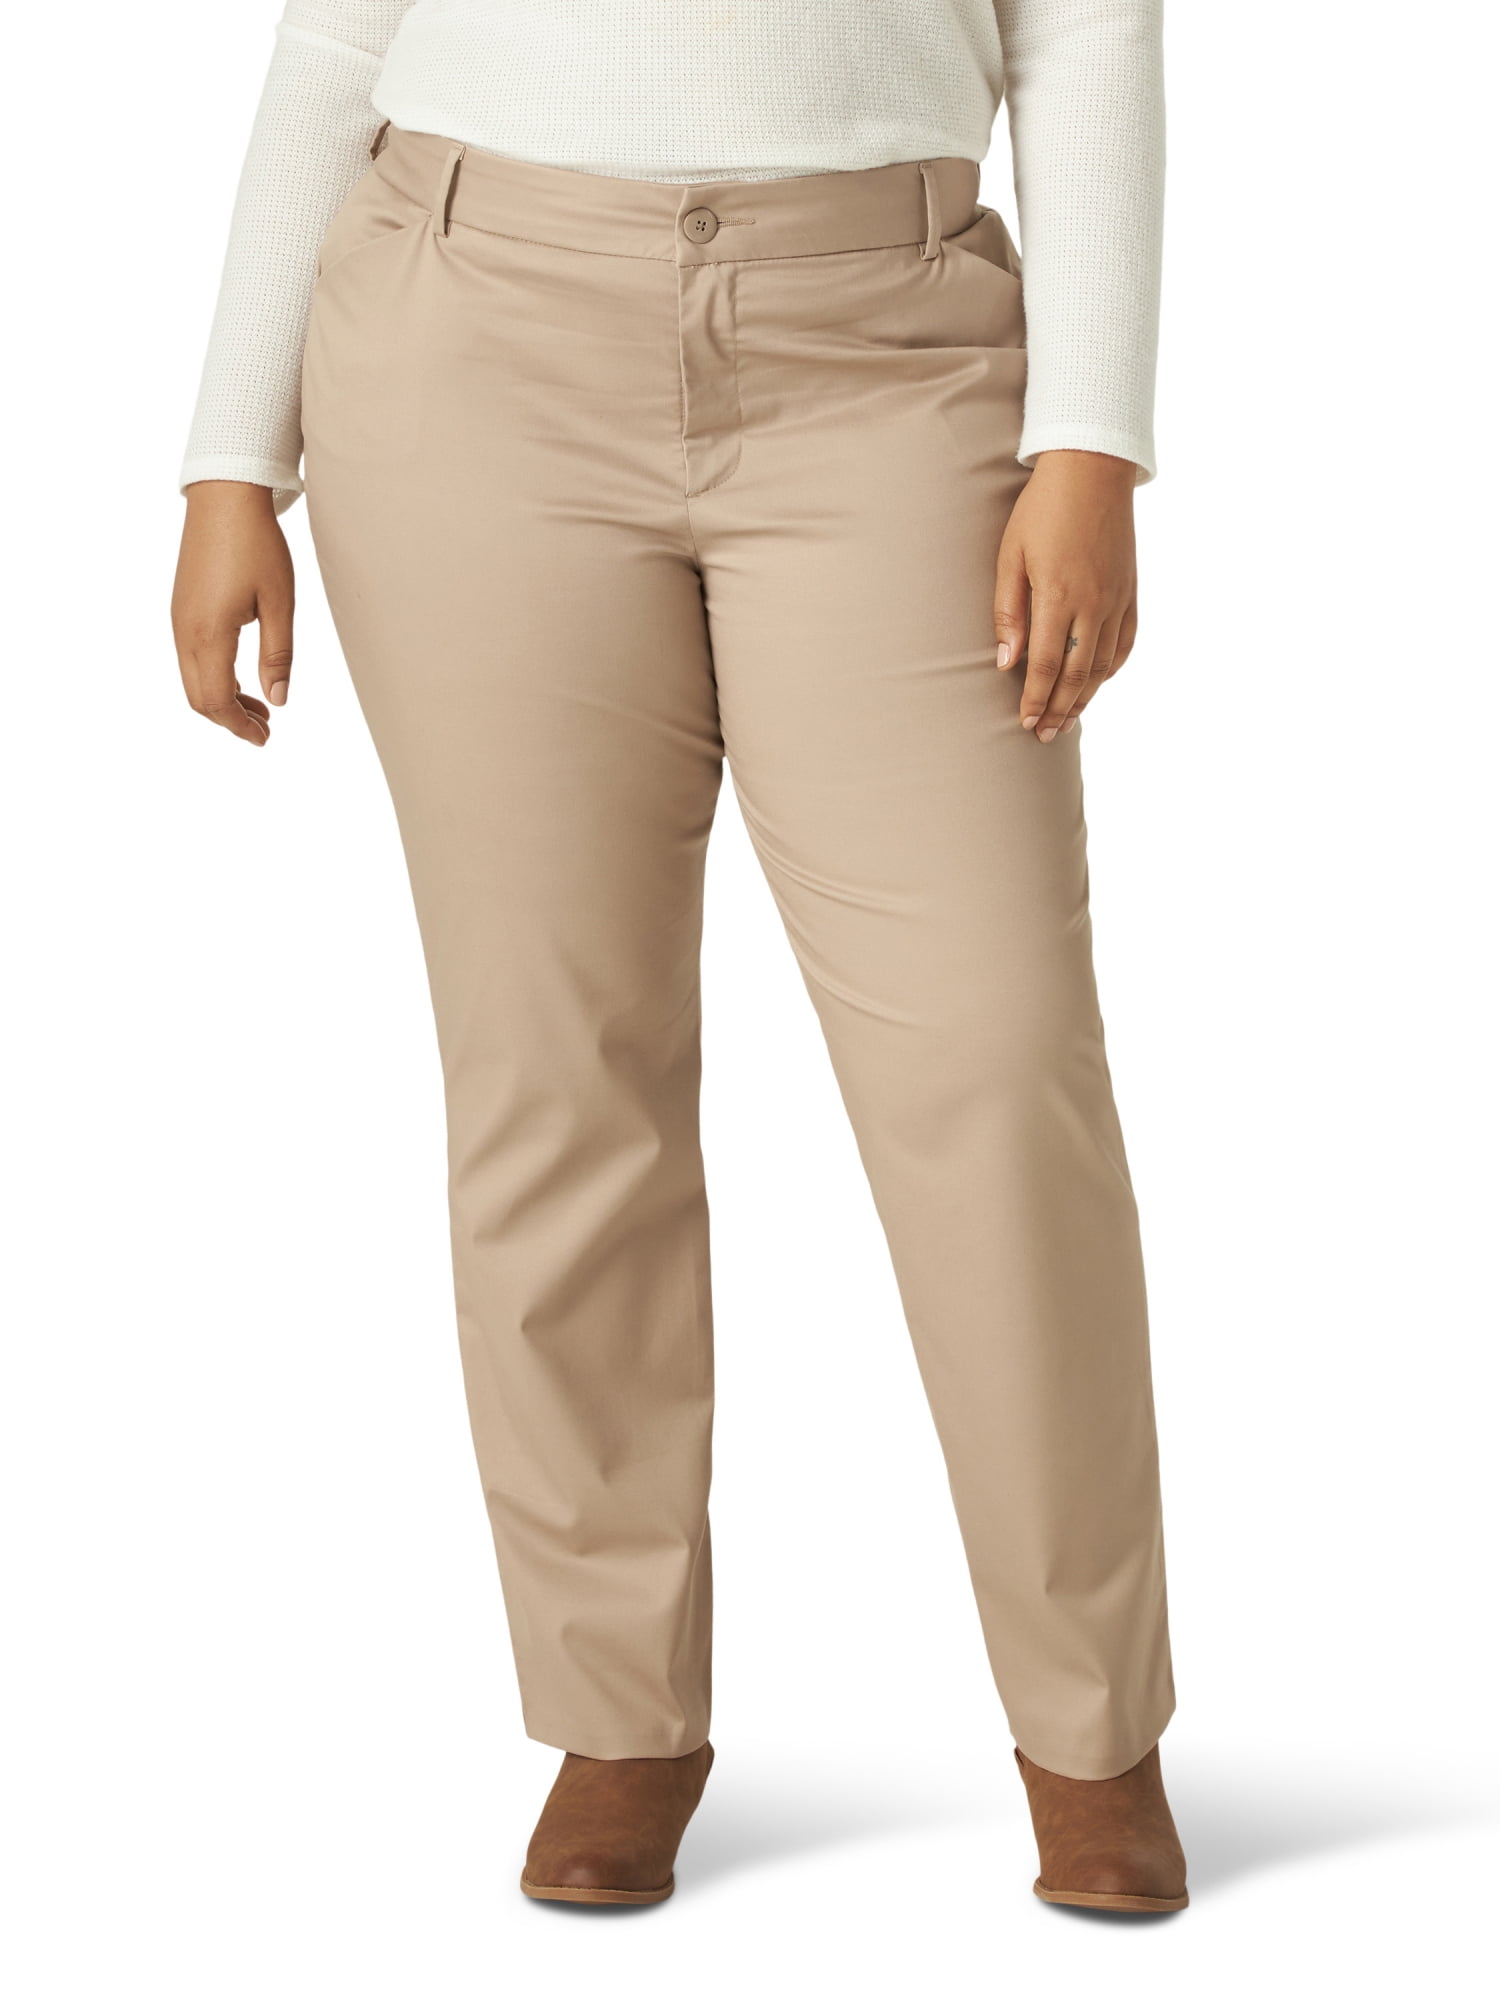 Lee Womens Wrinkle Free Relaxed Fit Straight Leg Pant 